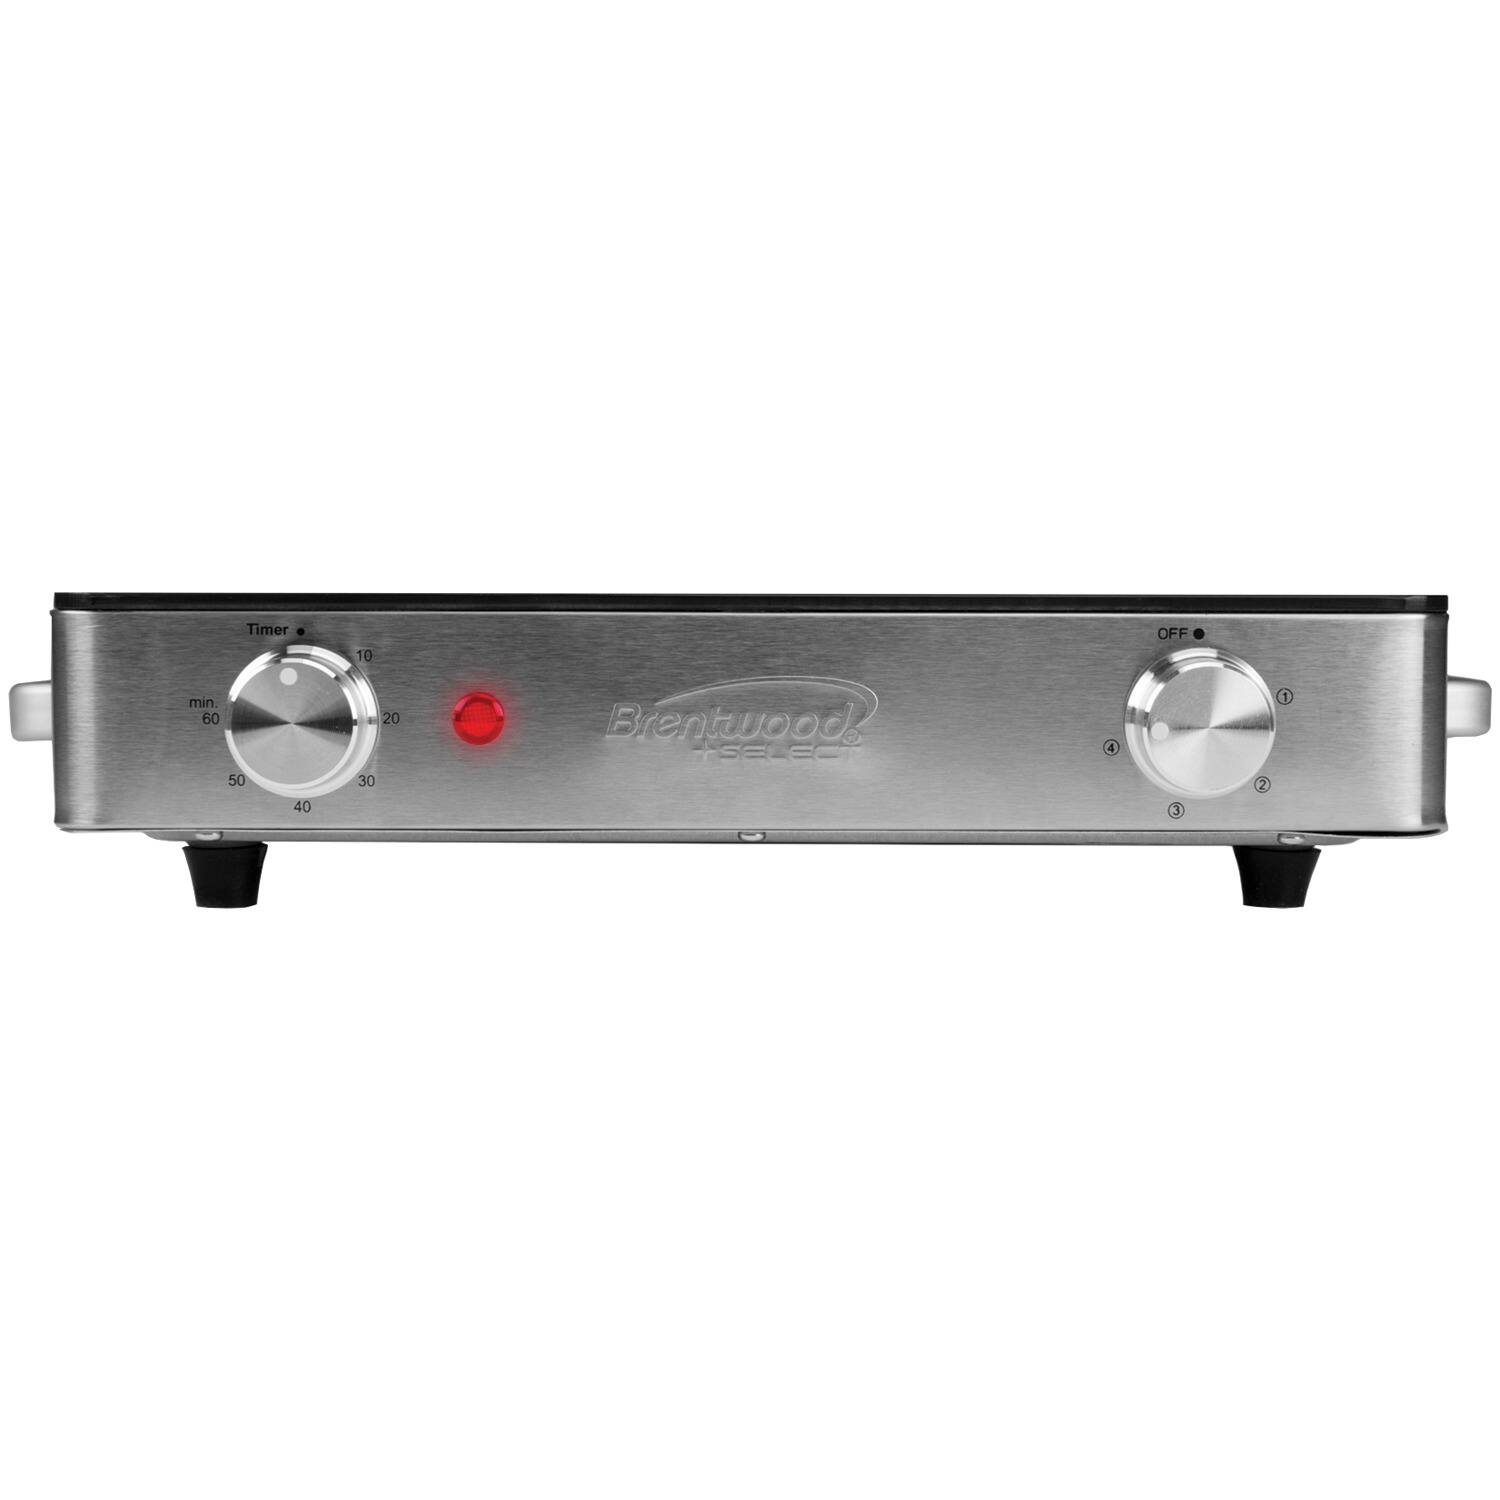 Brentwood Single Infrared Electric Countertop Burner | Michaels